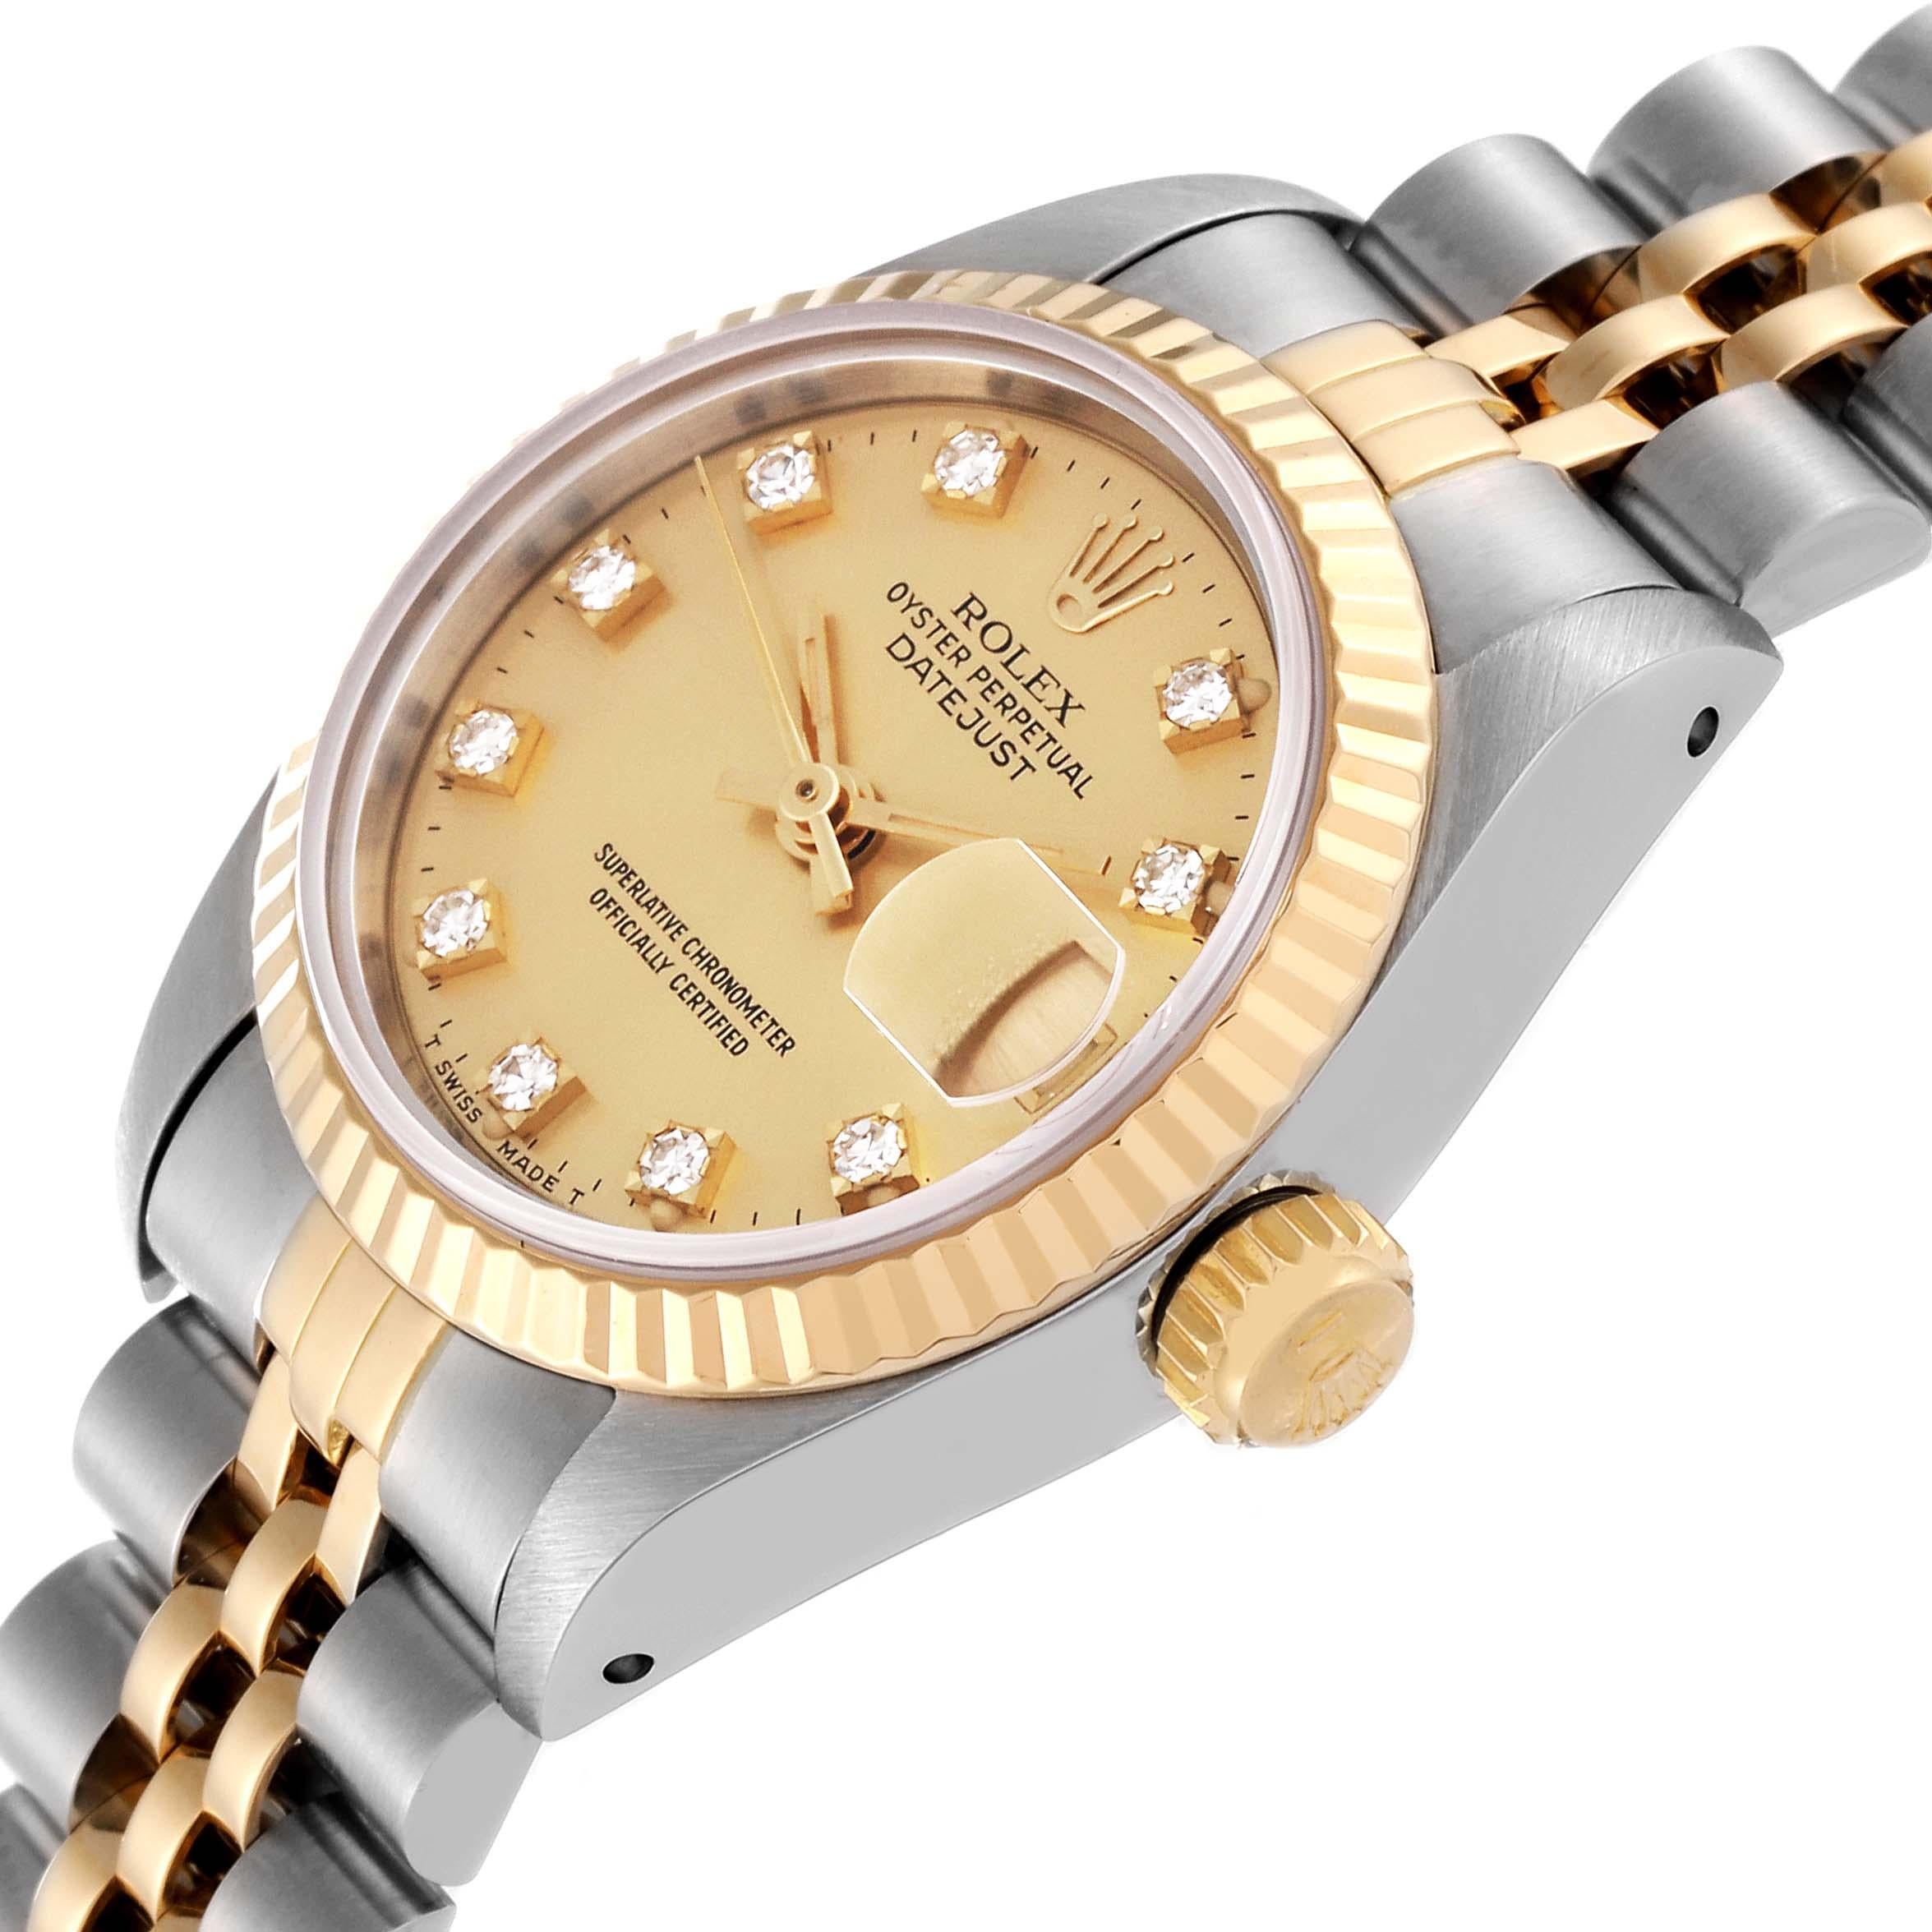 Rolex Datejust Diamond Dial Steel Yellow Gold Ladies Watch 69173. Officially certified chronometer automatic self-winding movement. Stainless steel oyster case 26.0 mm in diameter. Rolex logo on the crown. 18k yellow gold fluted bezel. Scratch